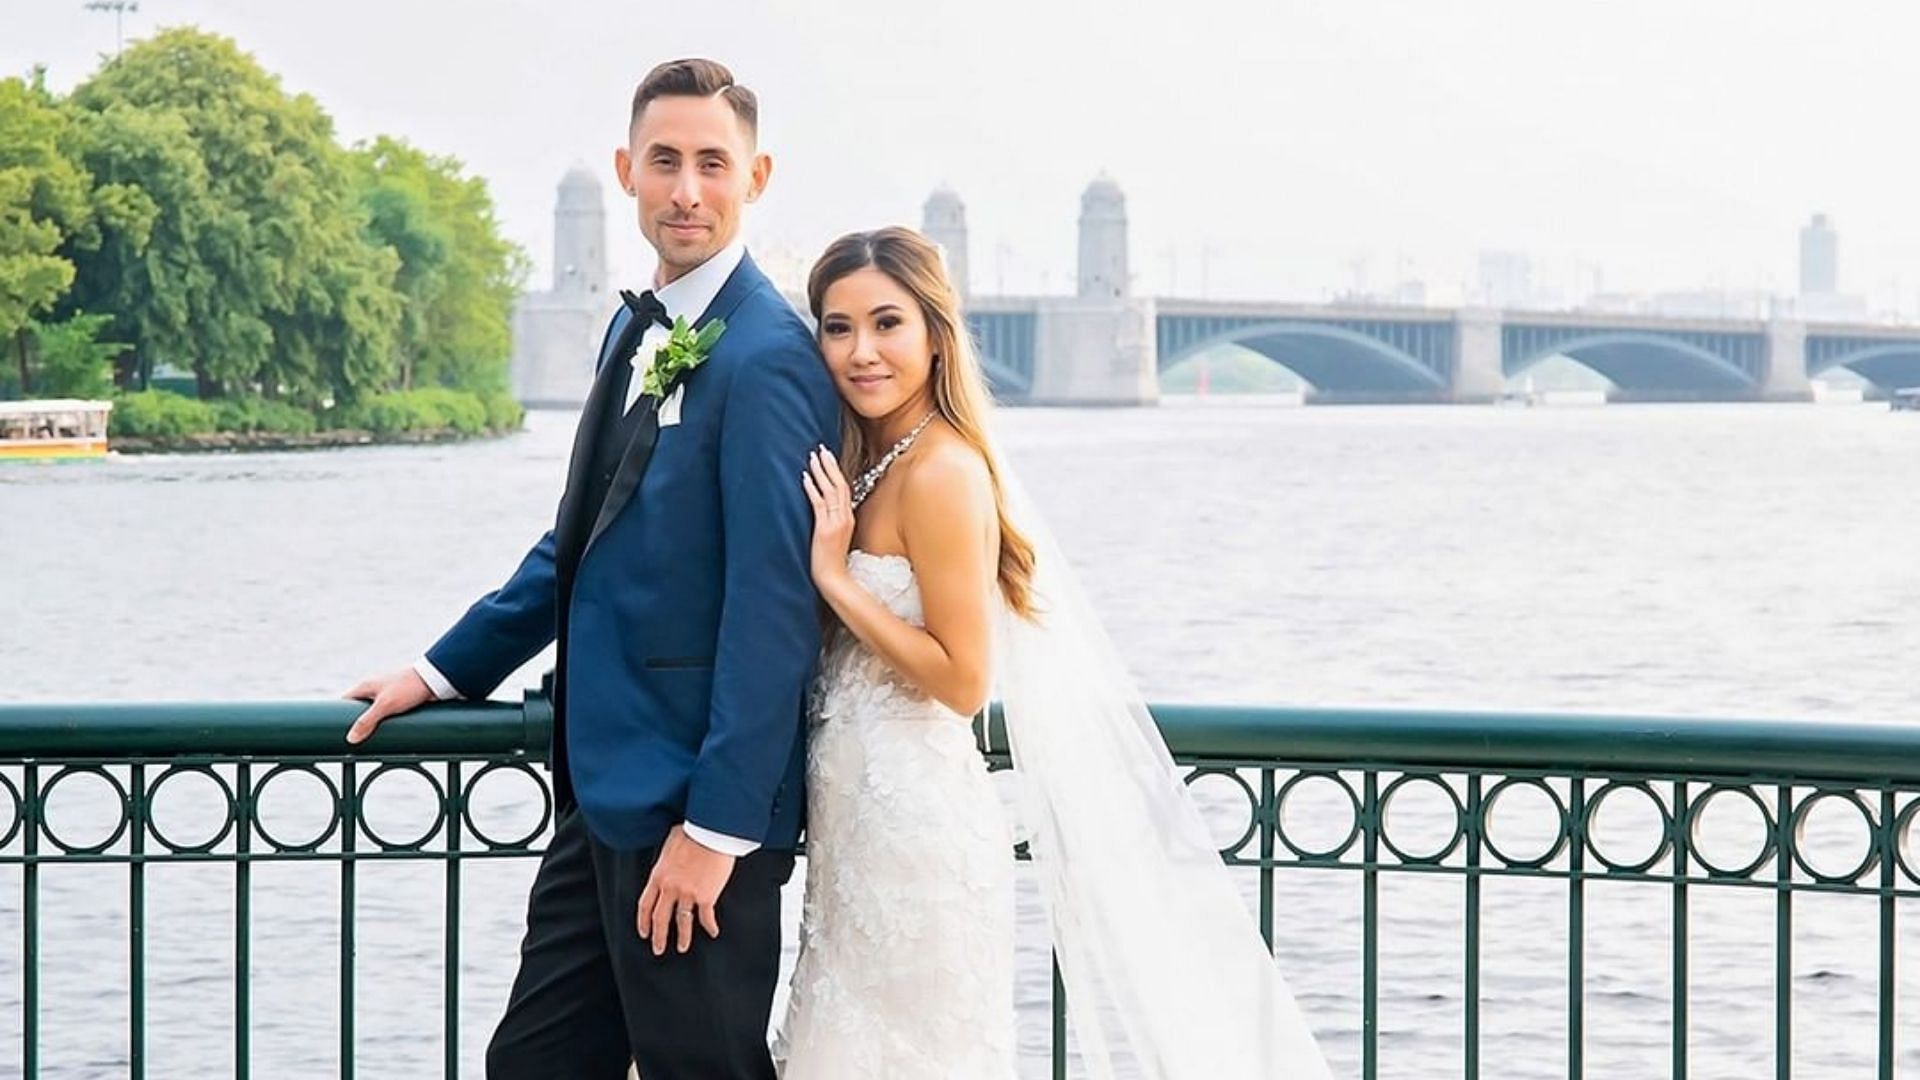 Married At First Sight couple Steve and Noi face another bump in the relationship (Image via mafslifetime/Instagram)